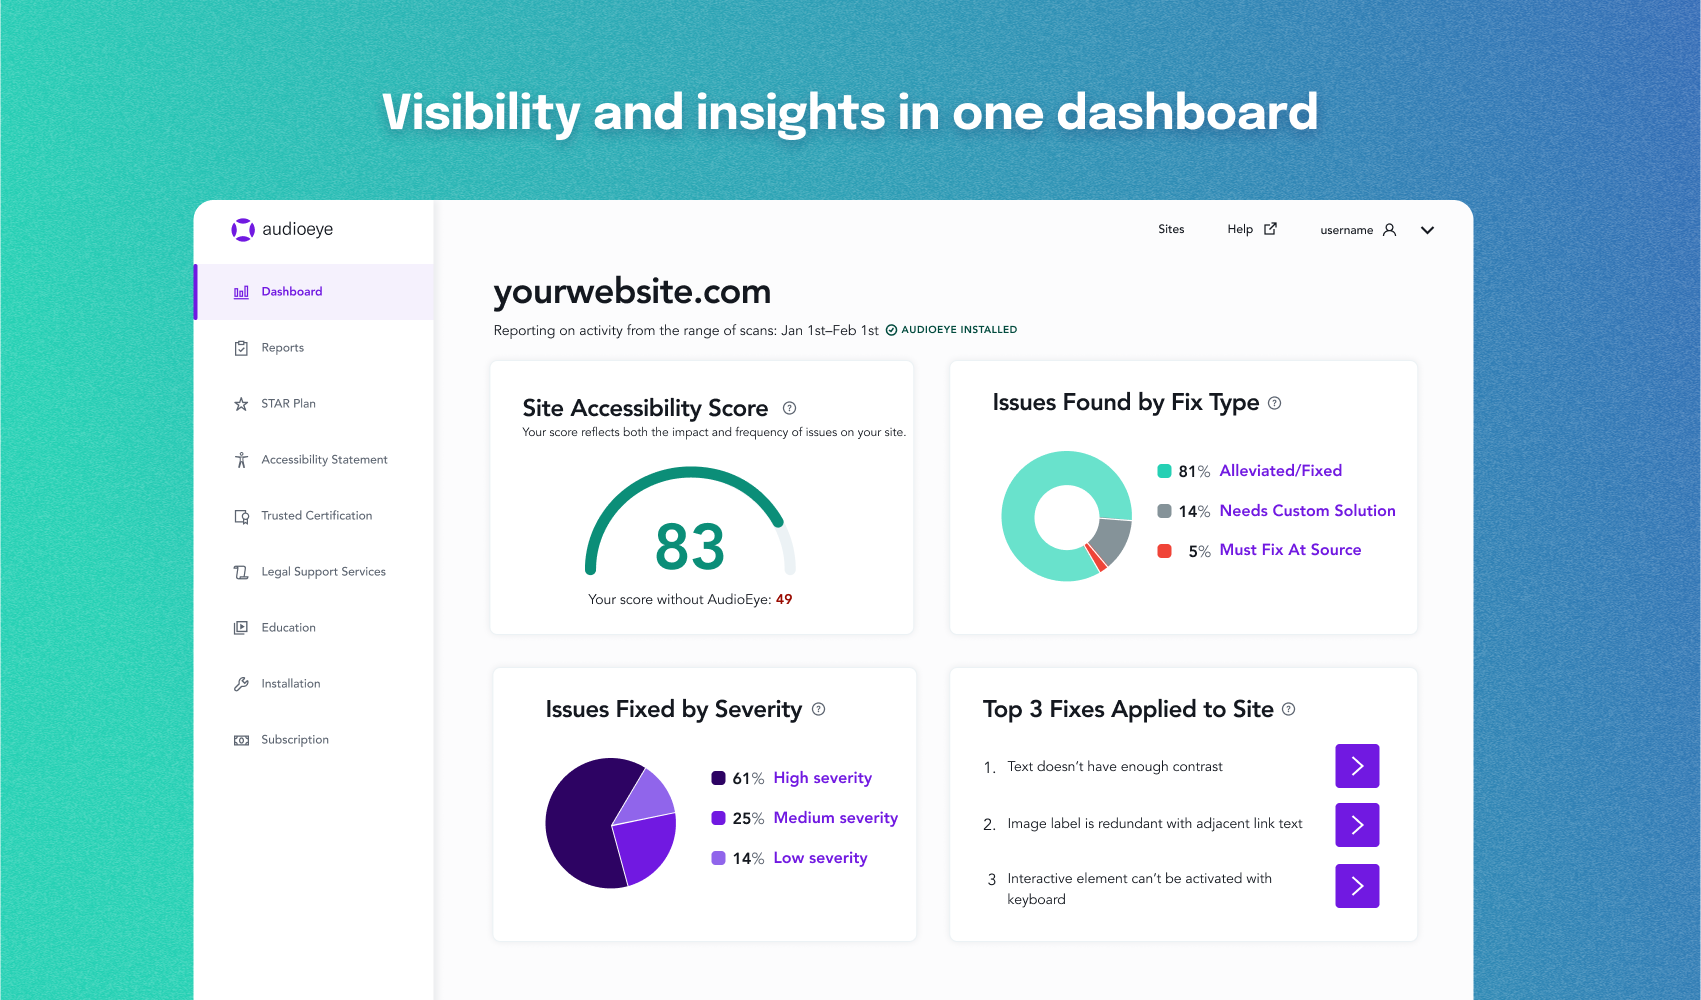 Visibility and insights in one dashboard